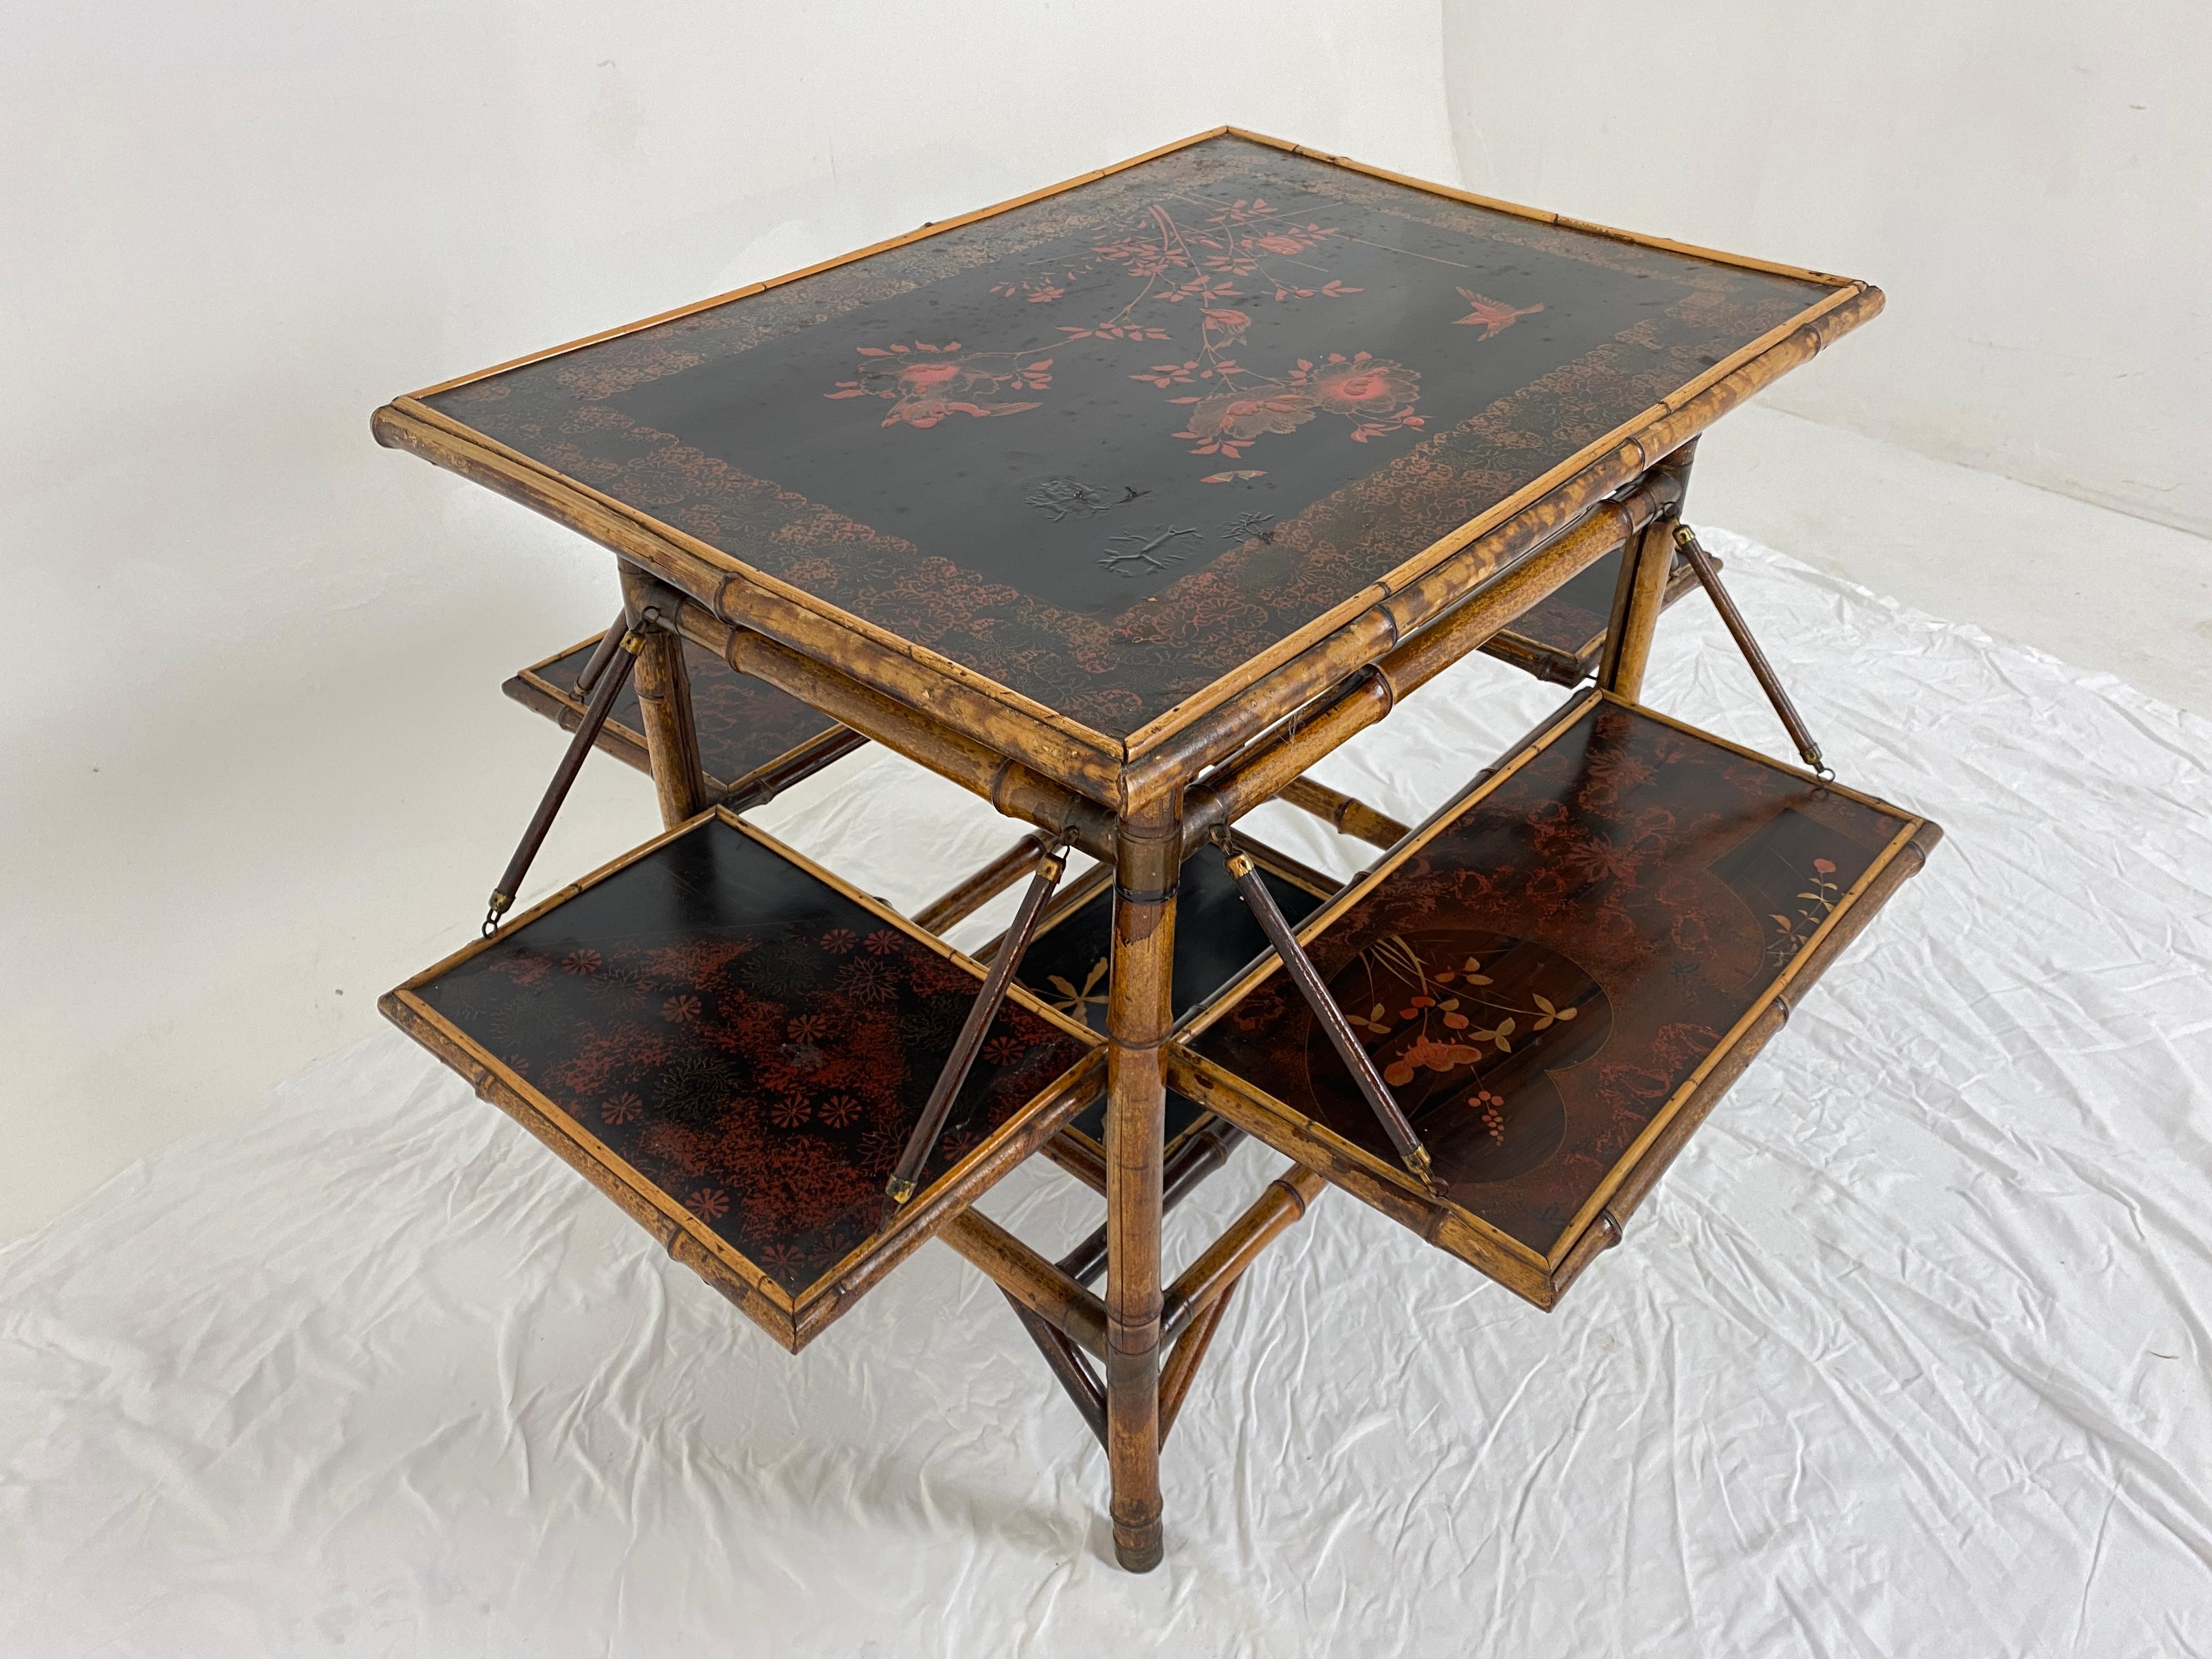 Antique Victorian Japanned tiered bamboo table Chinoiserie, Scotland 1880, H735.

Scotland 1880
Bamboo
Original Finish
Rectangular Top with lacquered chinoiserie panel in the oriental style with blossoms, foliage and buds.
Four folding shelves with